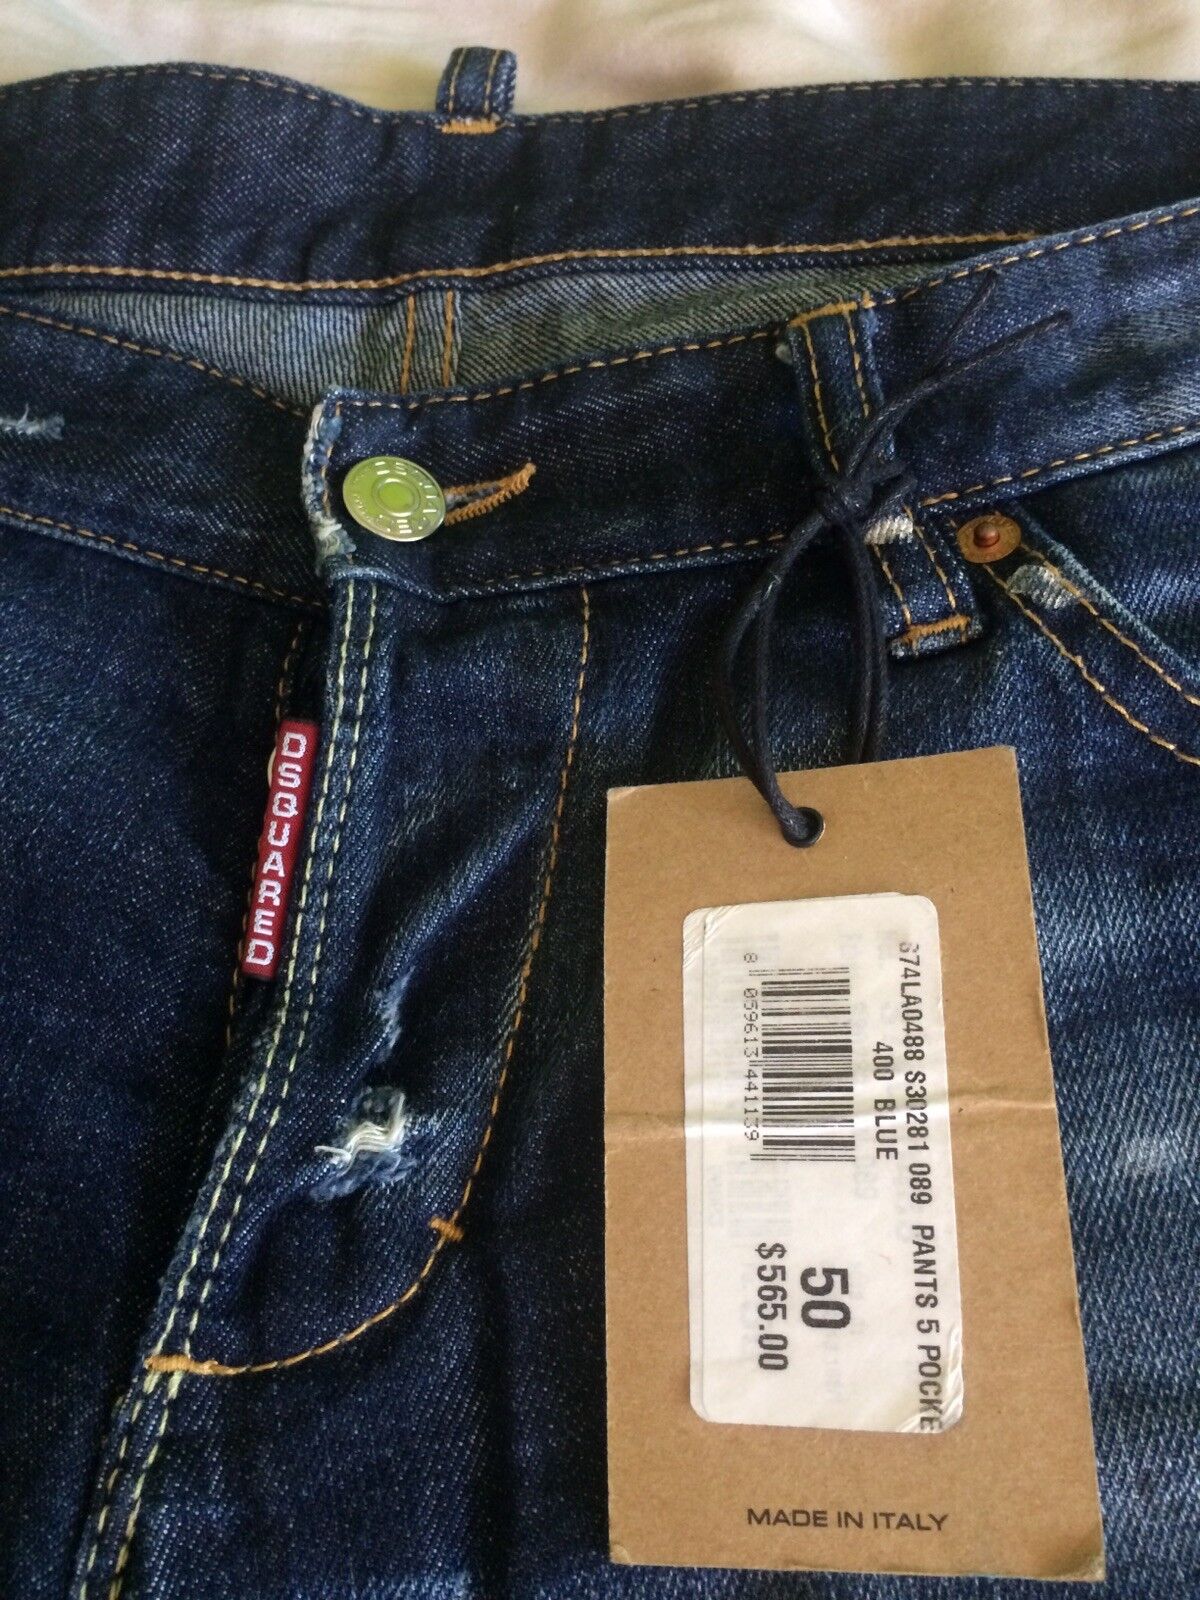 Authentic brand new with tags Dsquared Jeans size : 34 US